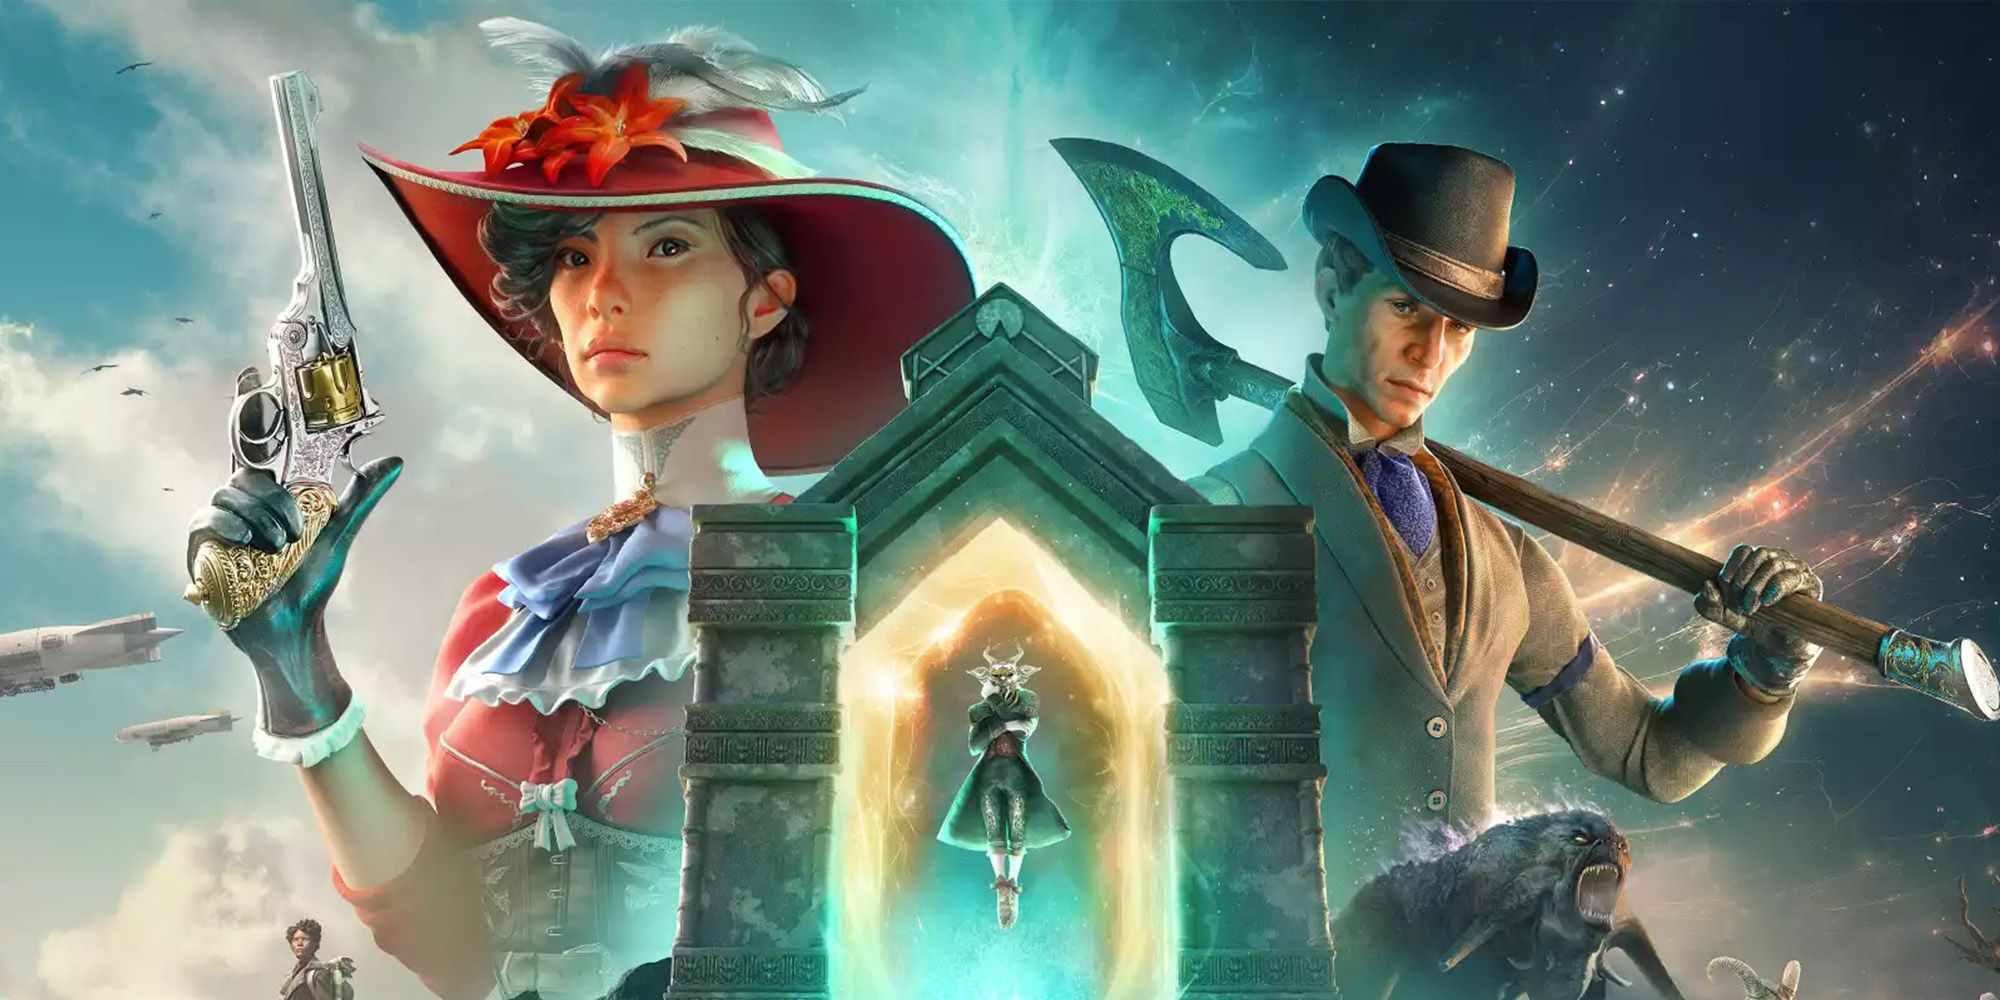 Key art from Bightingale showing two Victorian characters flanking a portal.